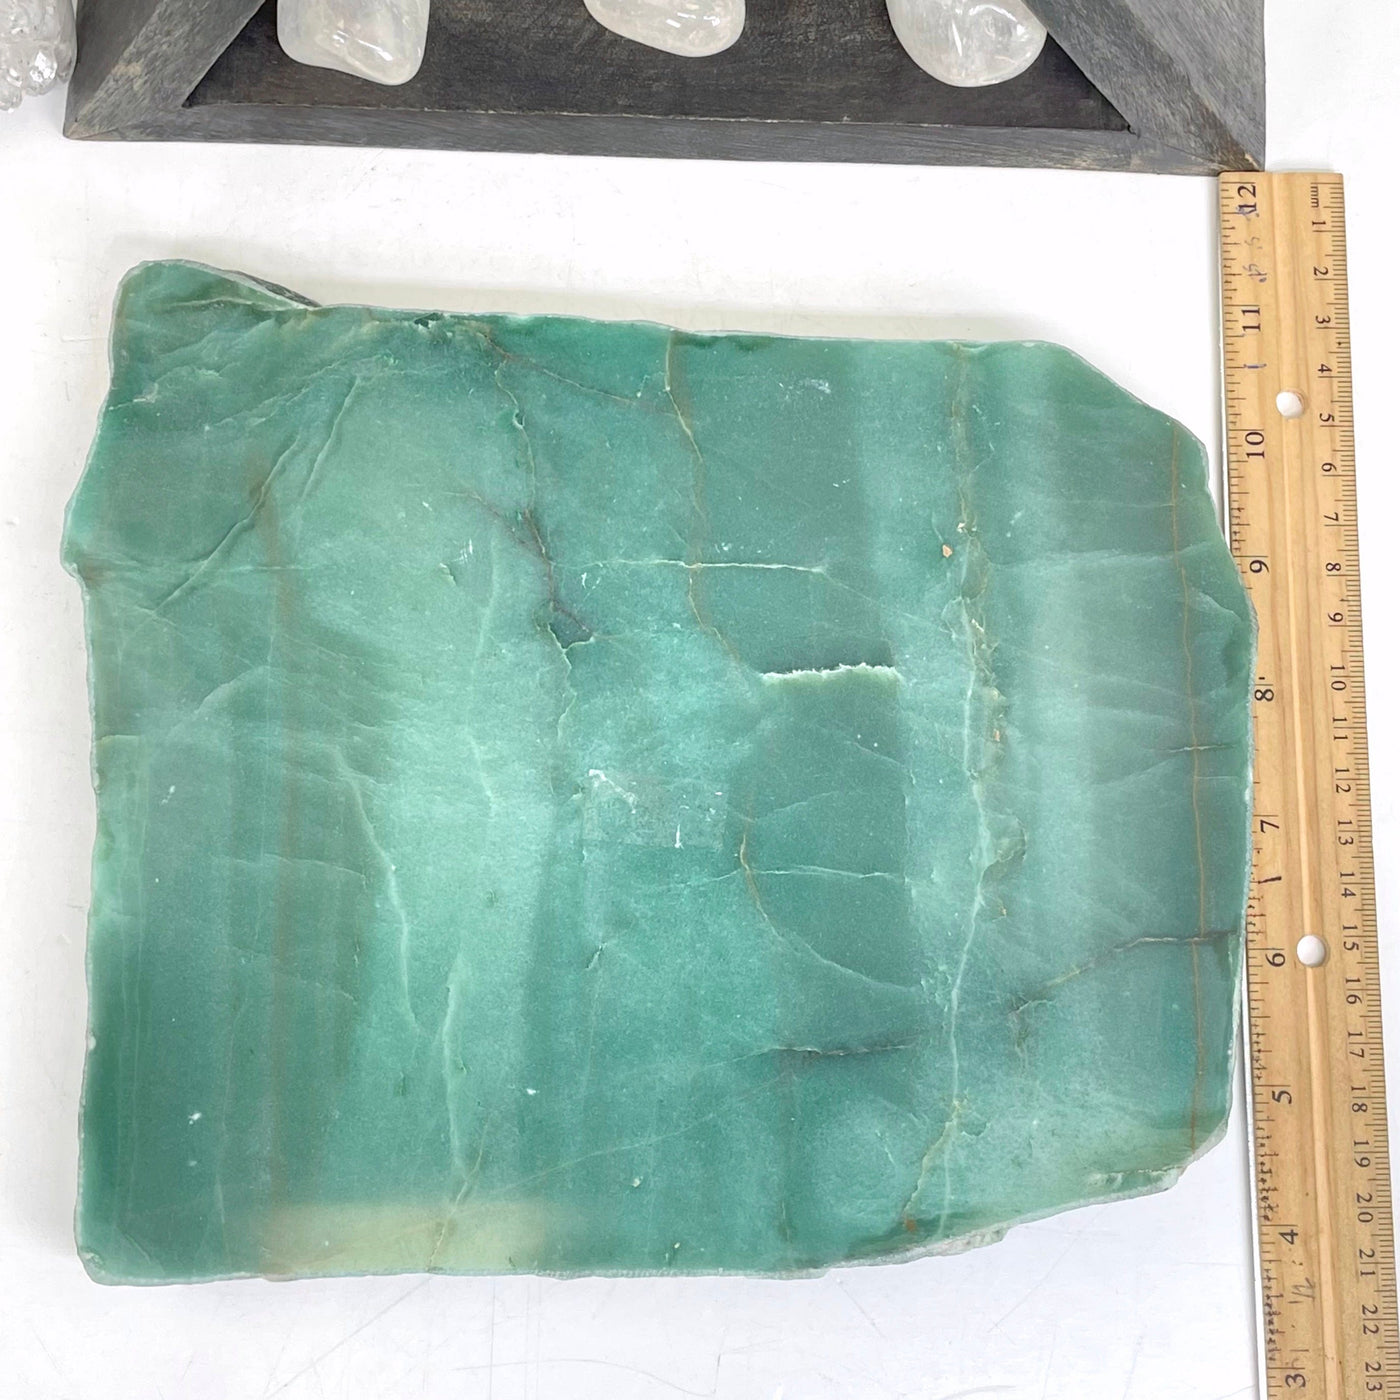 overhead view of green quartz platter with ruler for size reference